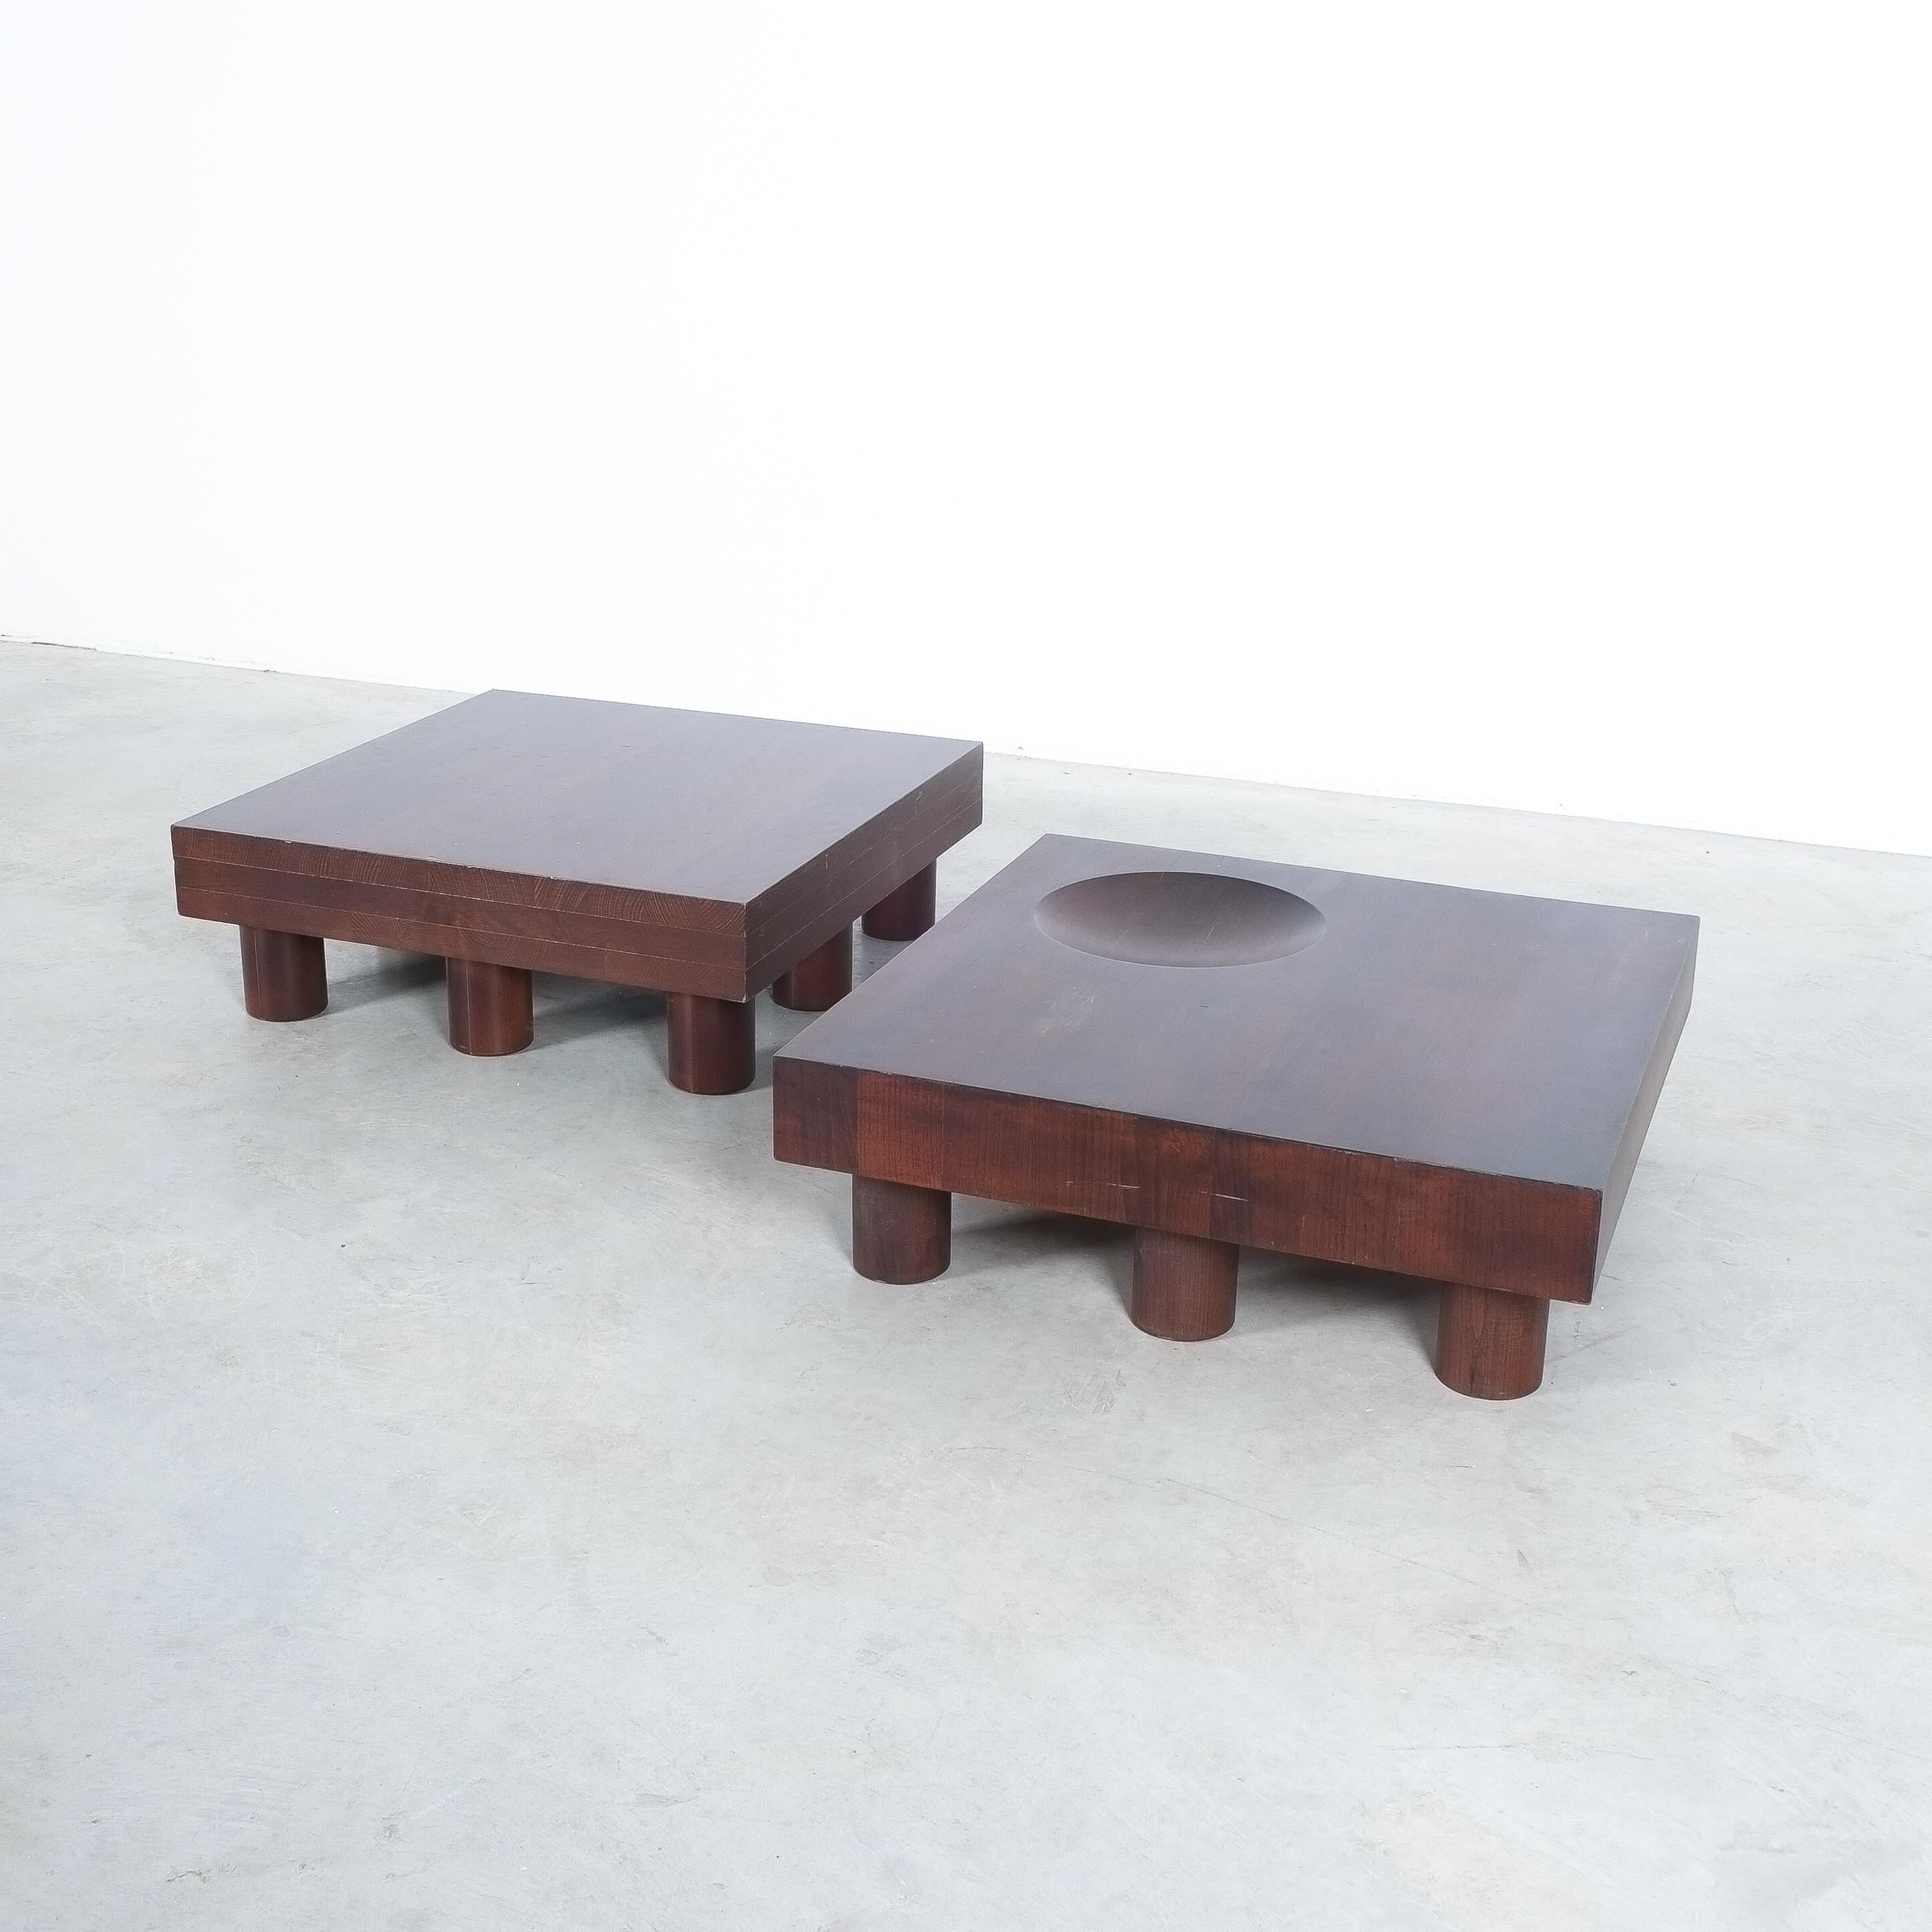 Solid pair of oak tables, circa 1970

Beautiful pair of low side tables or coffee tables. Handcrafted small tables made from solid oak wood glazed in dark cherrywood red. One has got a massive butcher-top. The other one a sunken bowl or catch-all.